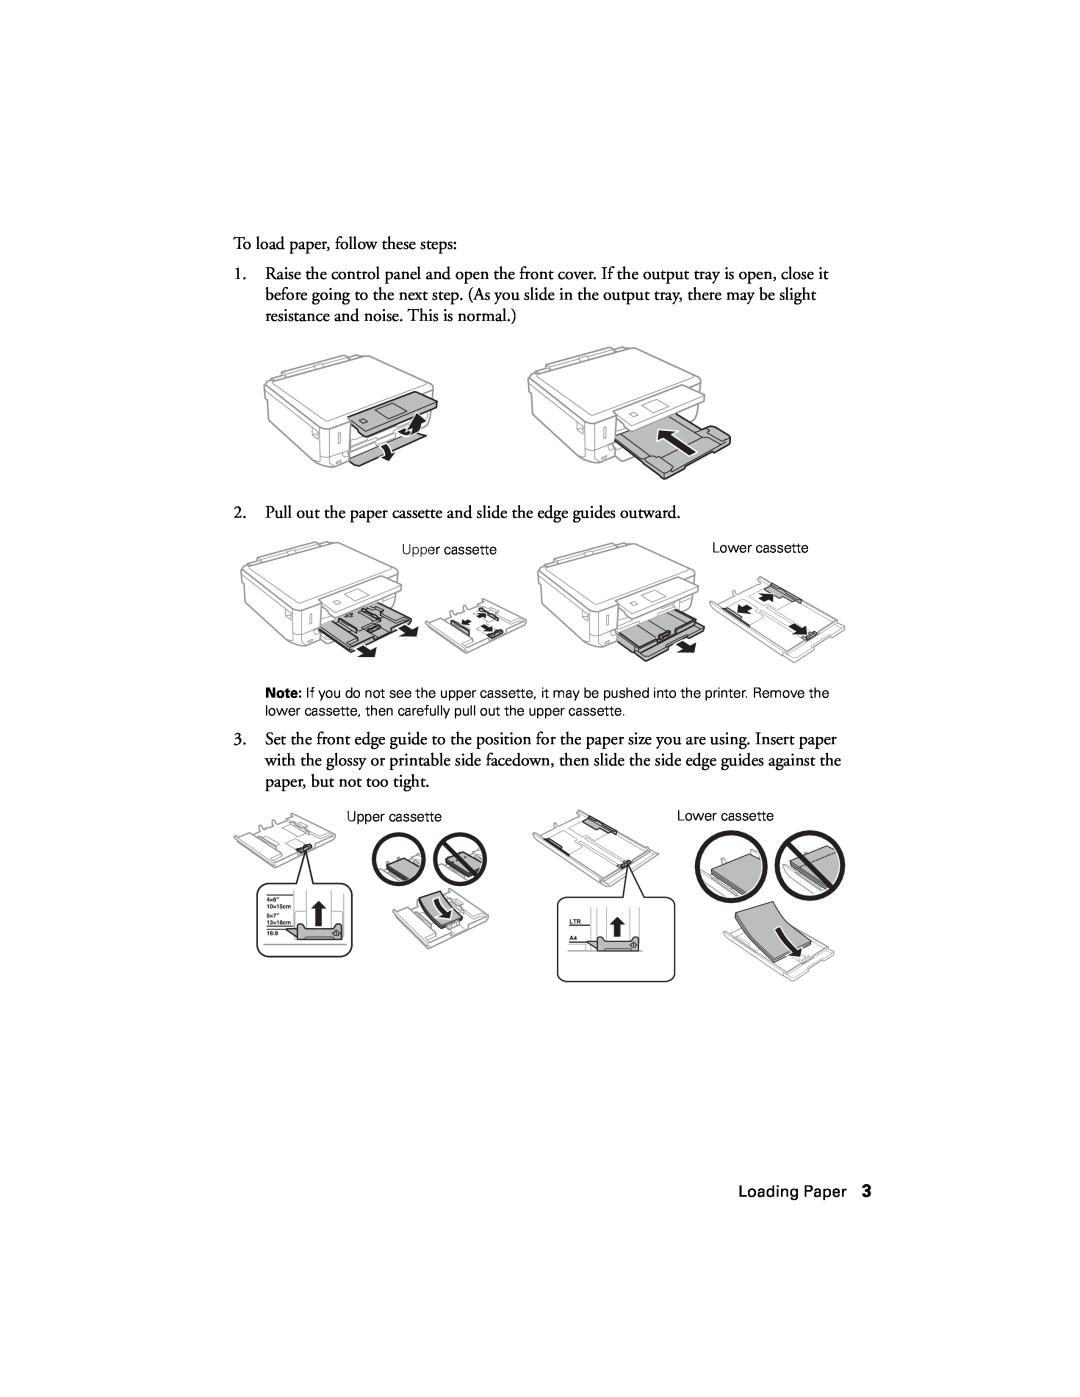 Epson XP-620 manual To load paper, follow these steps 